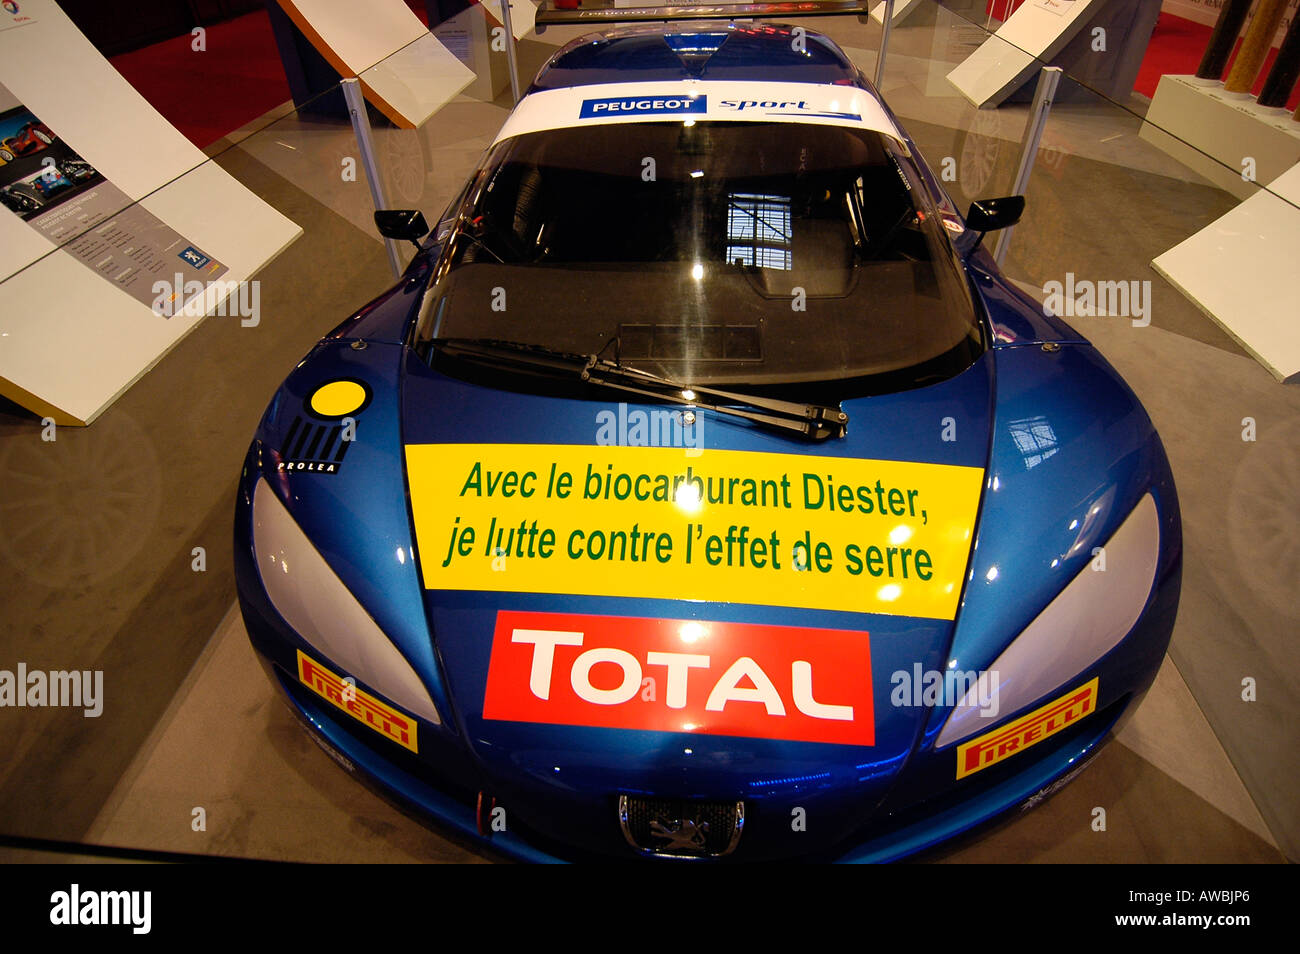 A car at the Paris 2006 World Car Exhibition, with an advertisement for biofuel on its hood. Stock Photo